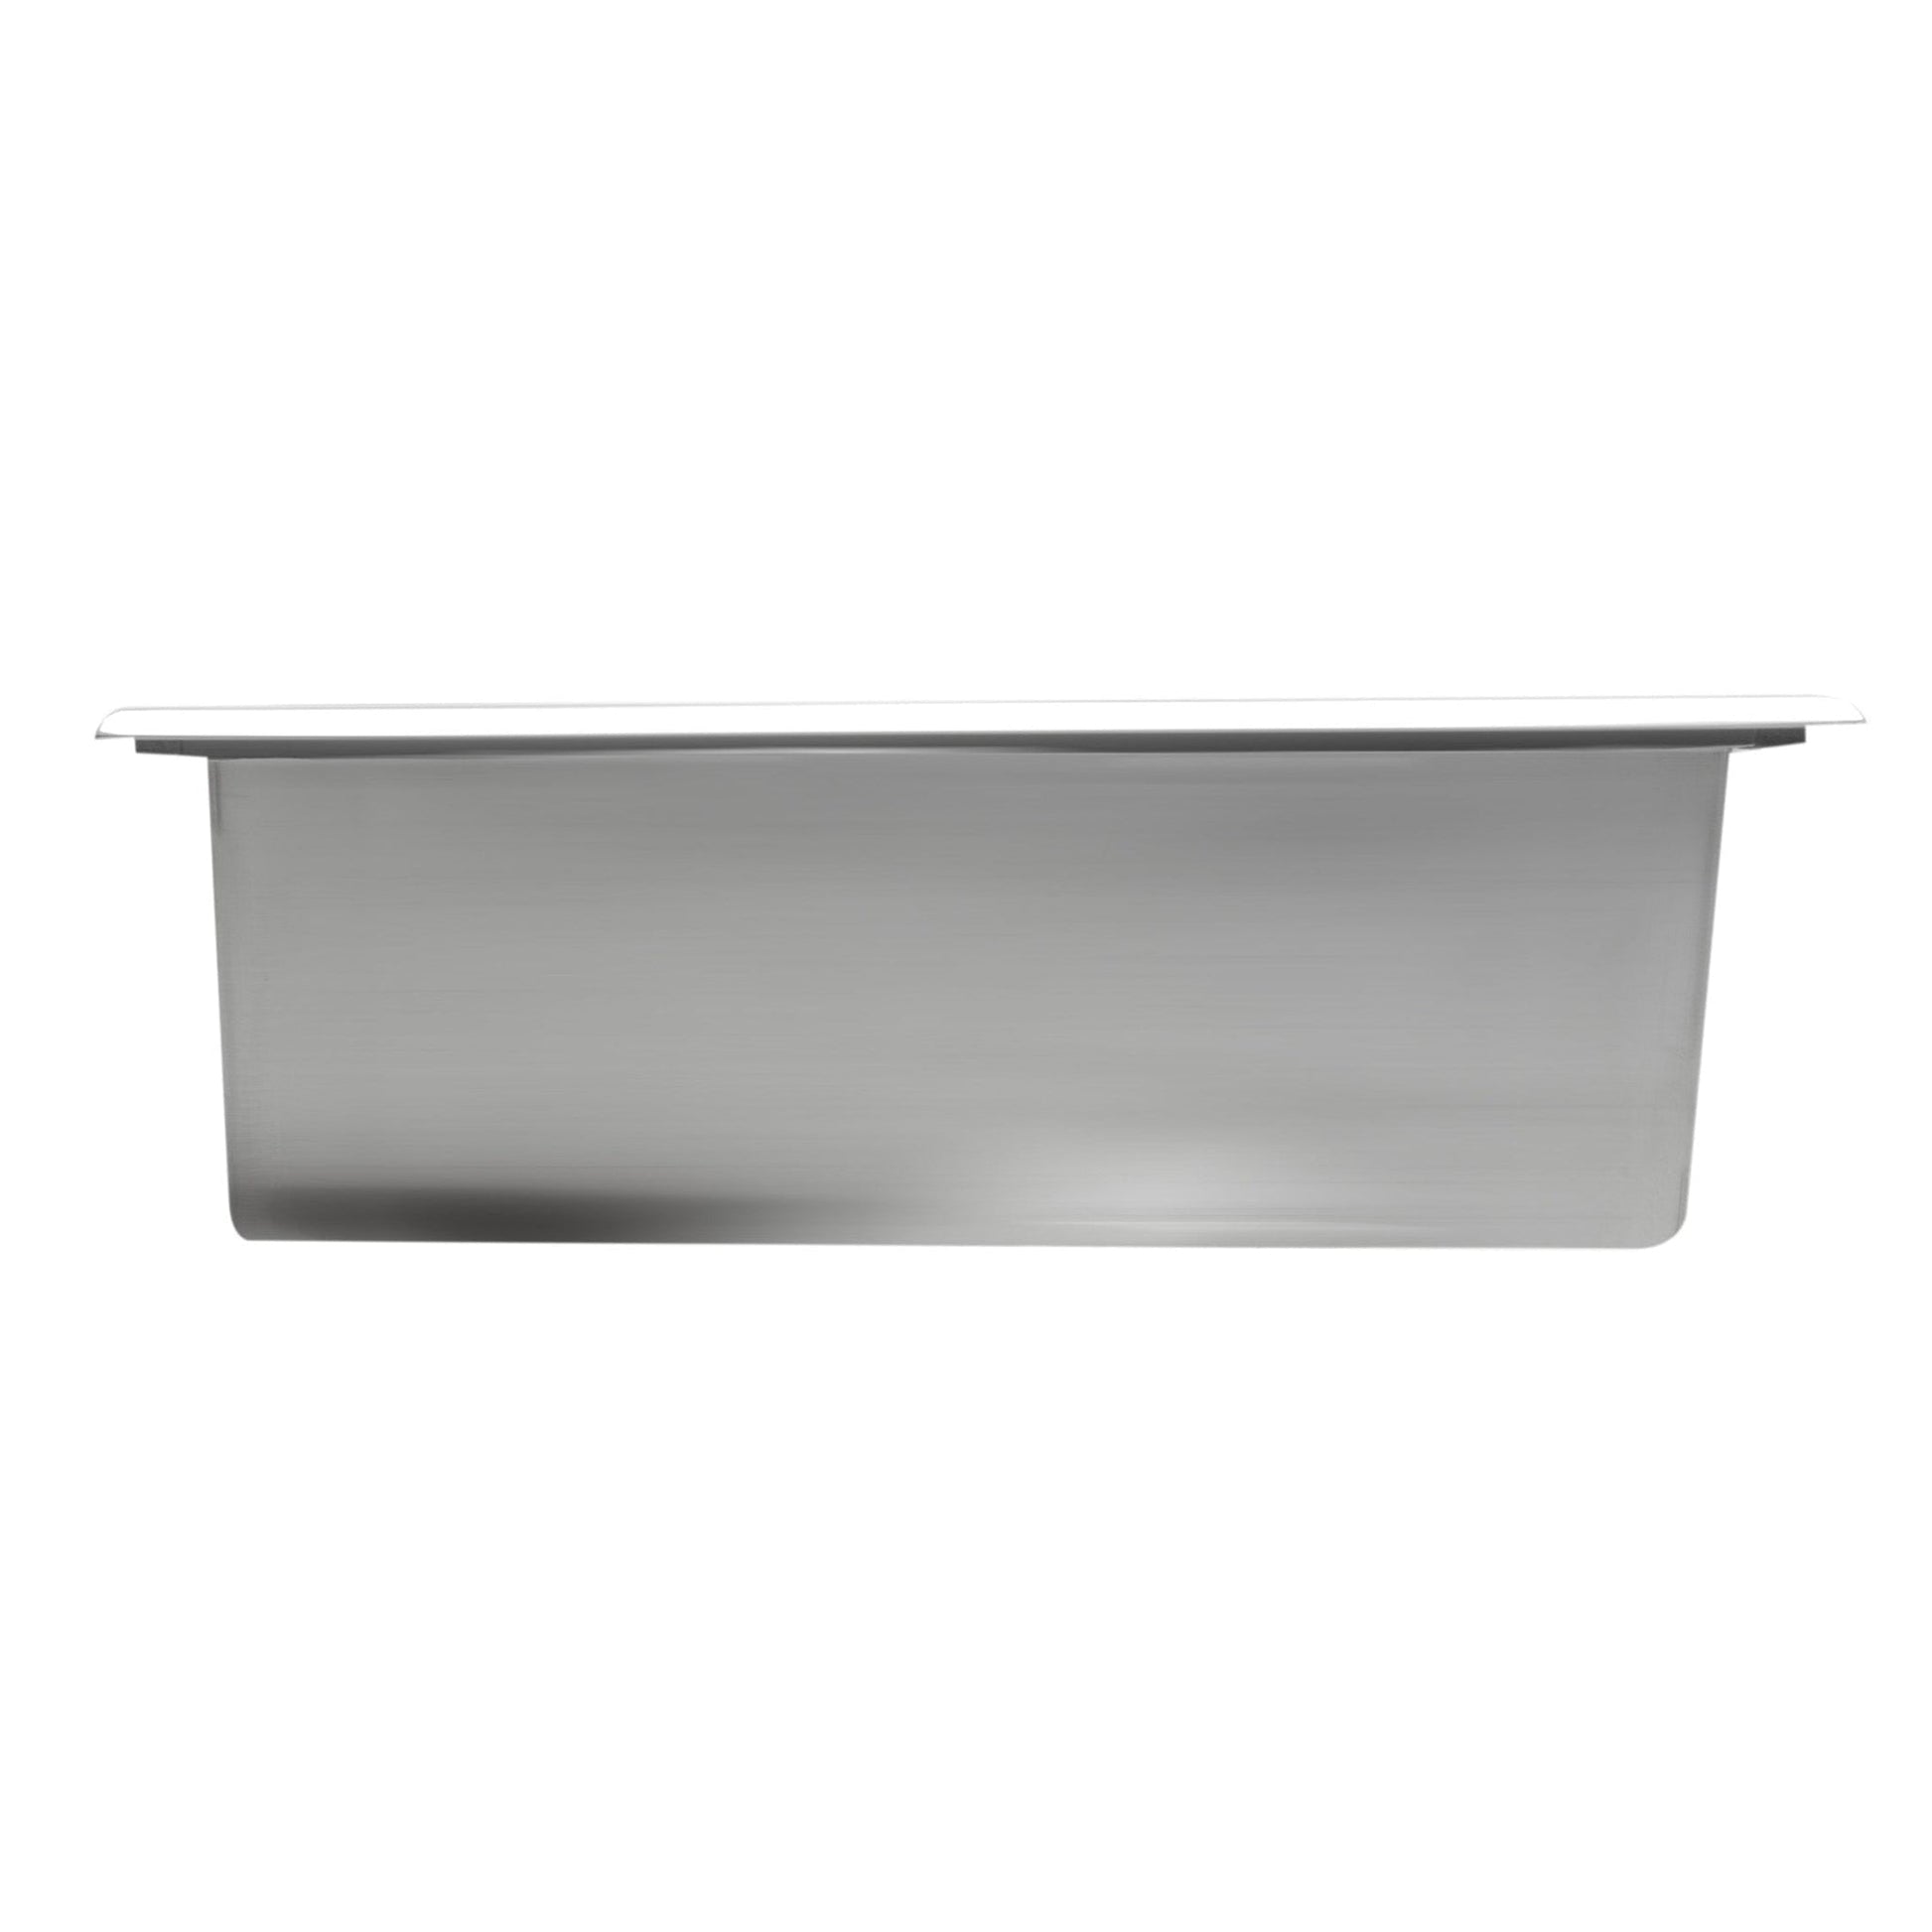 ALFI brand 12 x 24 White Matte Stainless Steel Vertical Double